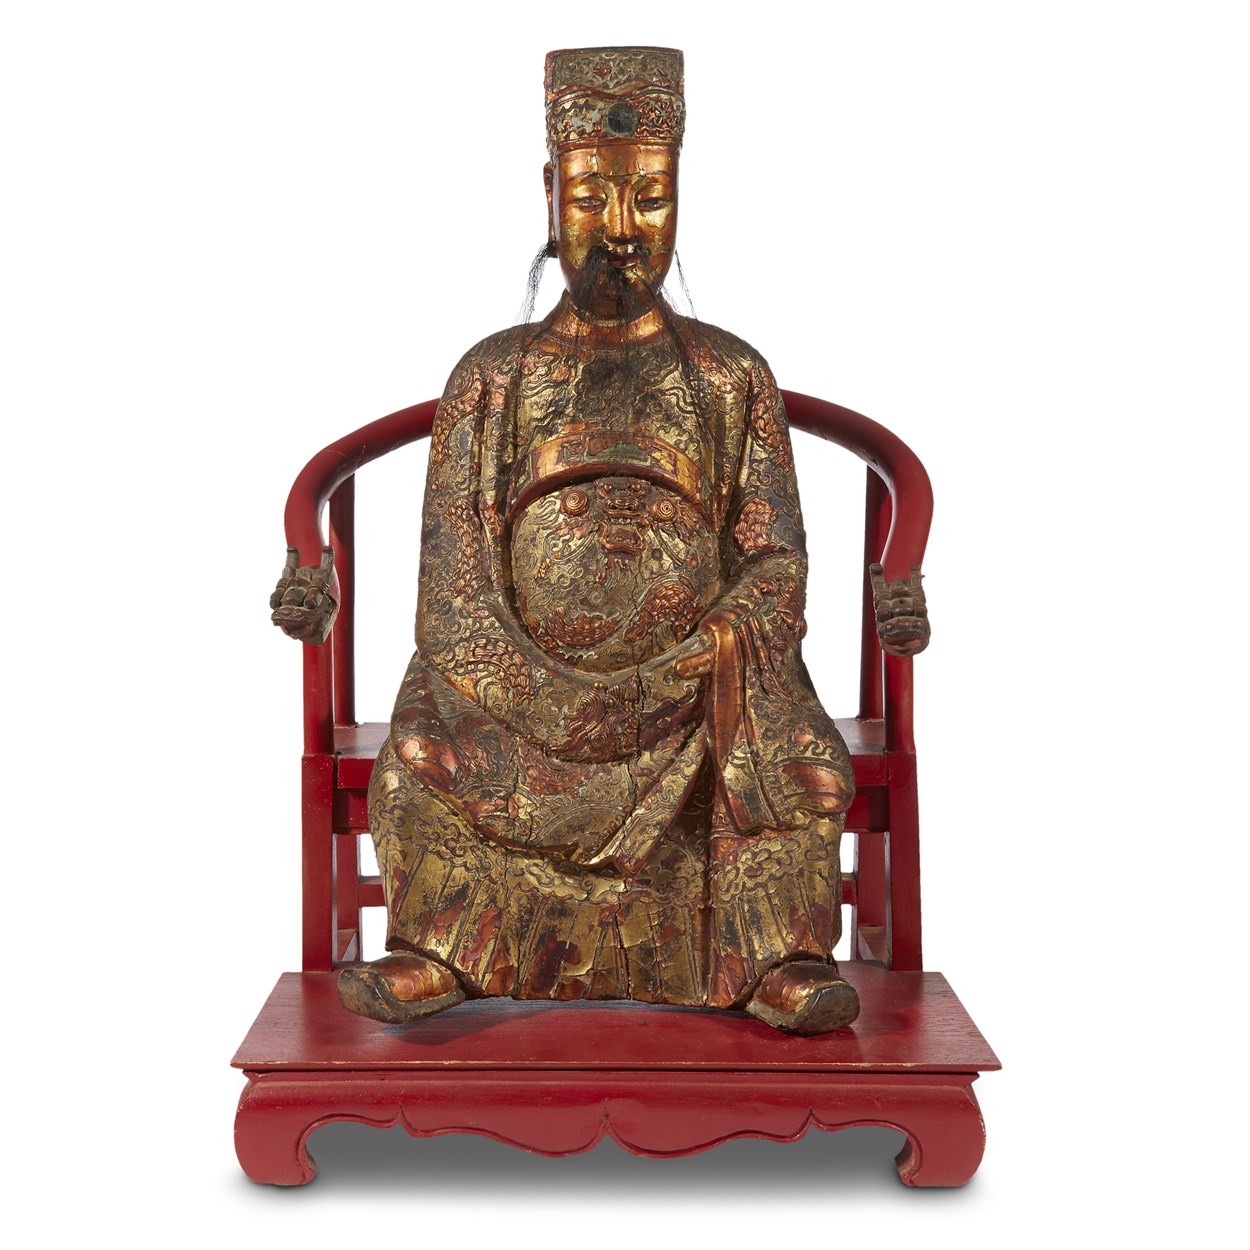 Lot 179 - A Chinese gilt lacquered wood figure of a dignitary on later horseshoe-back seat